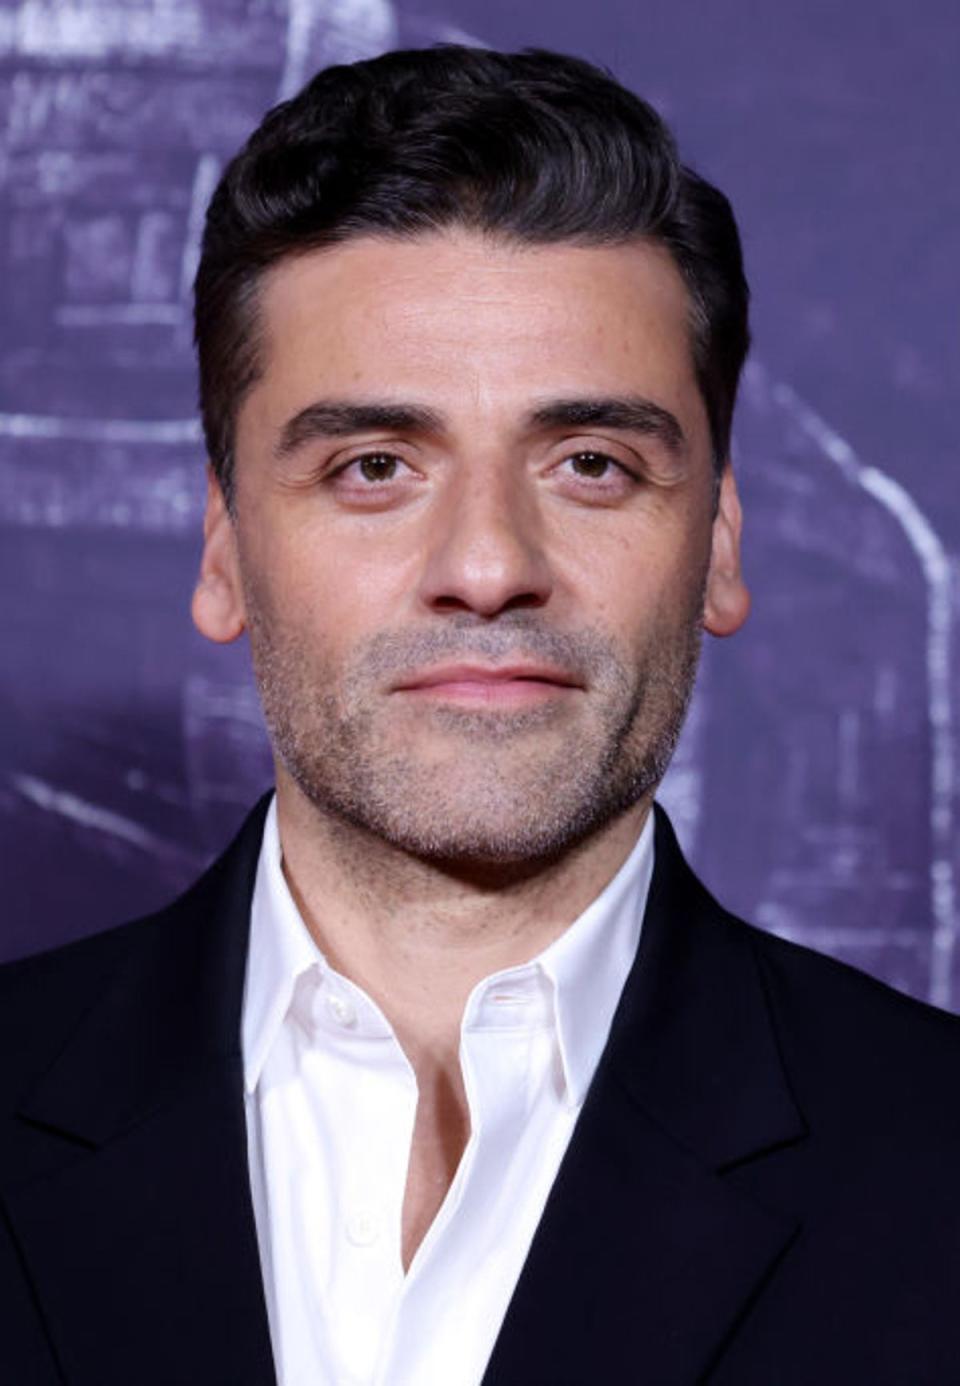 The... um, ‘unconventionally beautiful’ Oscar Isaac (Getty)